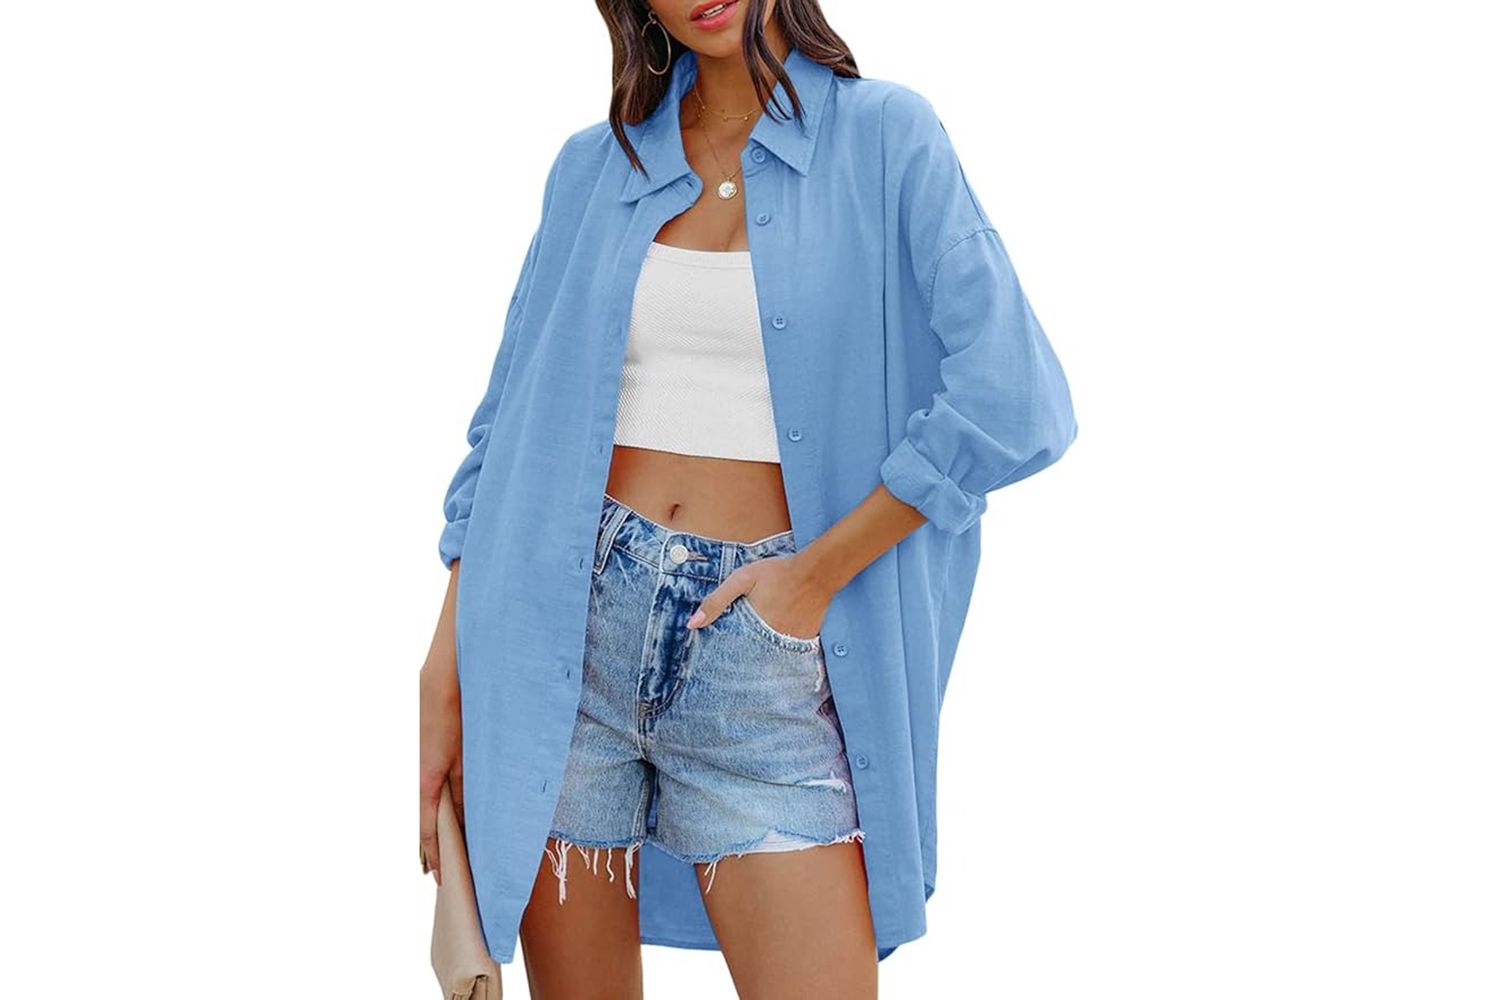 FSHAOES Womens Oversized Button Down Shirts Casual Loose Long Sleeve Solid Lapel Long Blouses Tops with Pockets